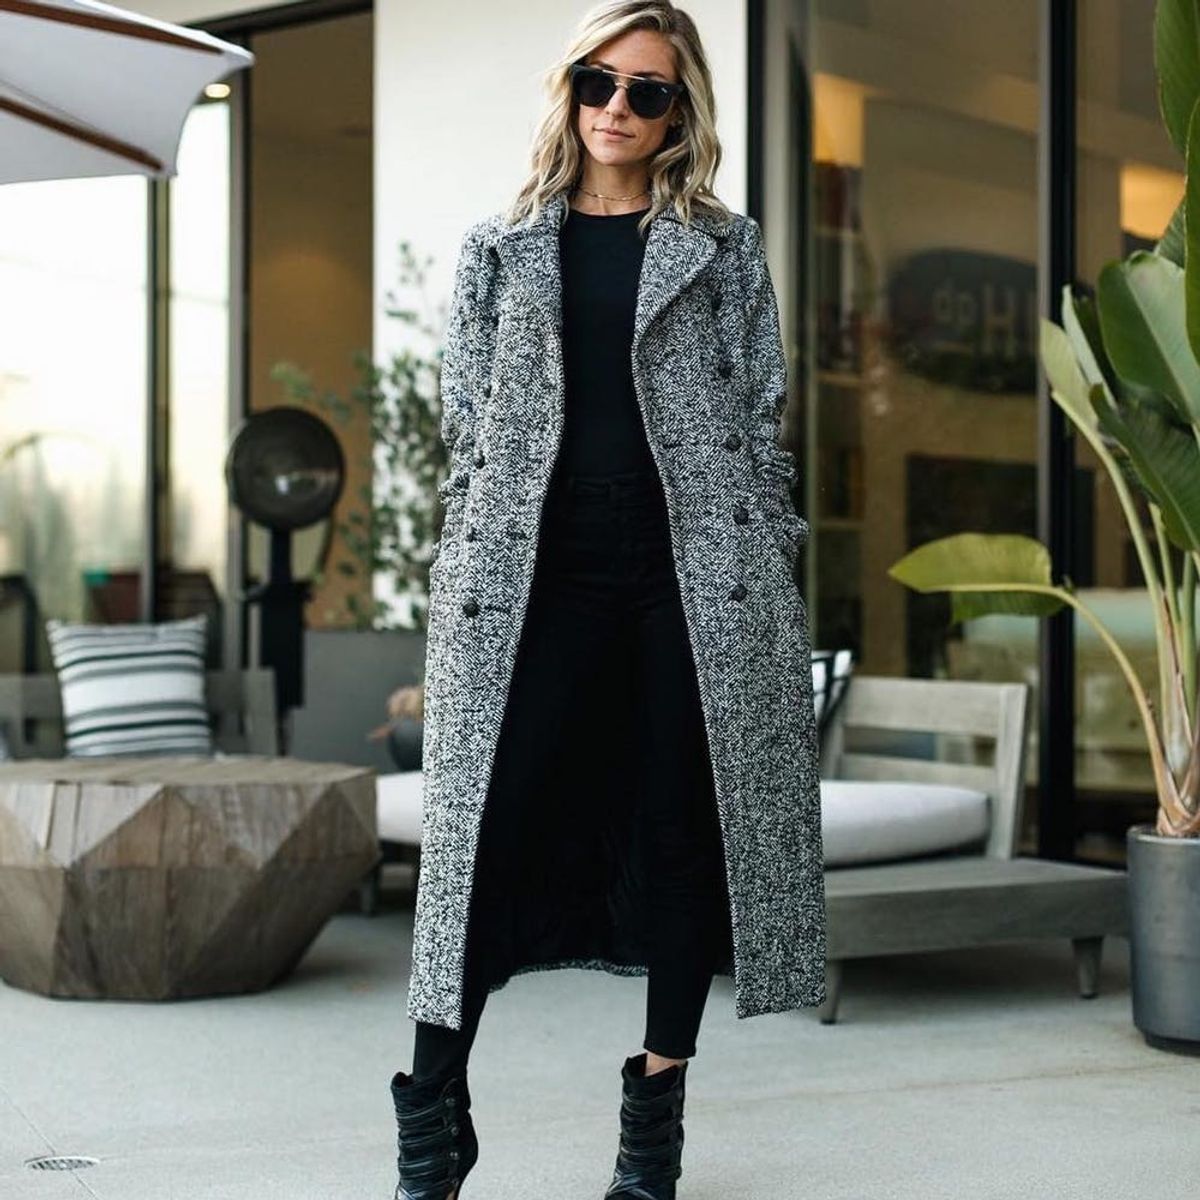 7 Celeb-Inspired Winter Fashion Buys That You Can Actually Afford